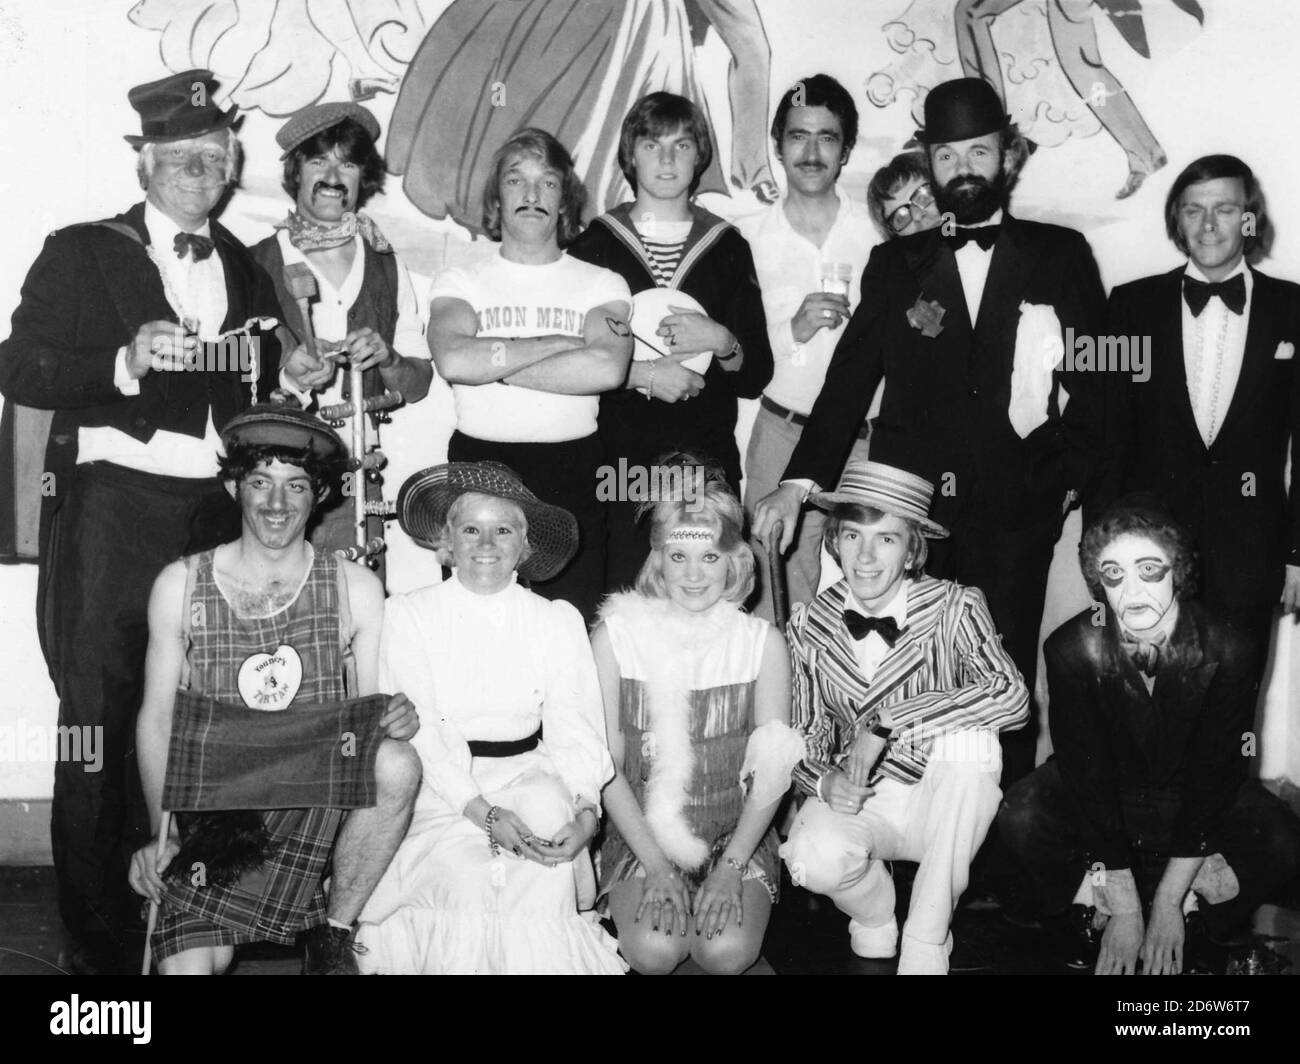 Butlins Filey, North Yorkshire, England, UK. 1975-1977 Archive images of holiday makers & redcoats at Butlins Filey. The entertainment staff would come together on a fridday to perform an Old Time Music Hall. The entertainment manager was Rocky Mason (back row left) who was legendary in his day Stock Photo